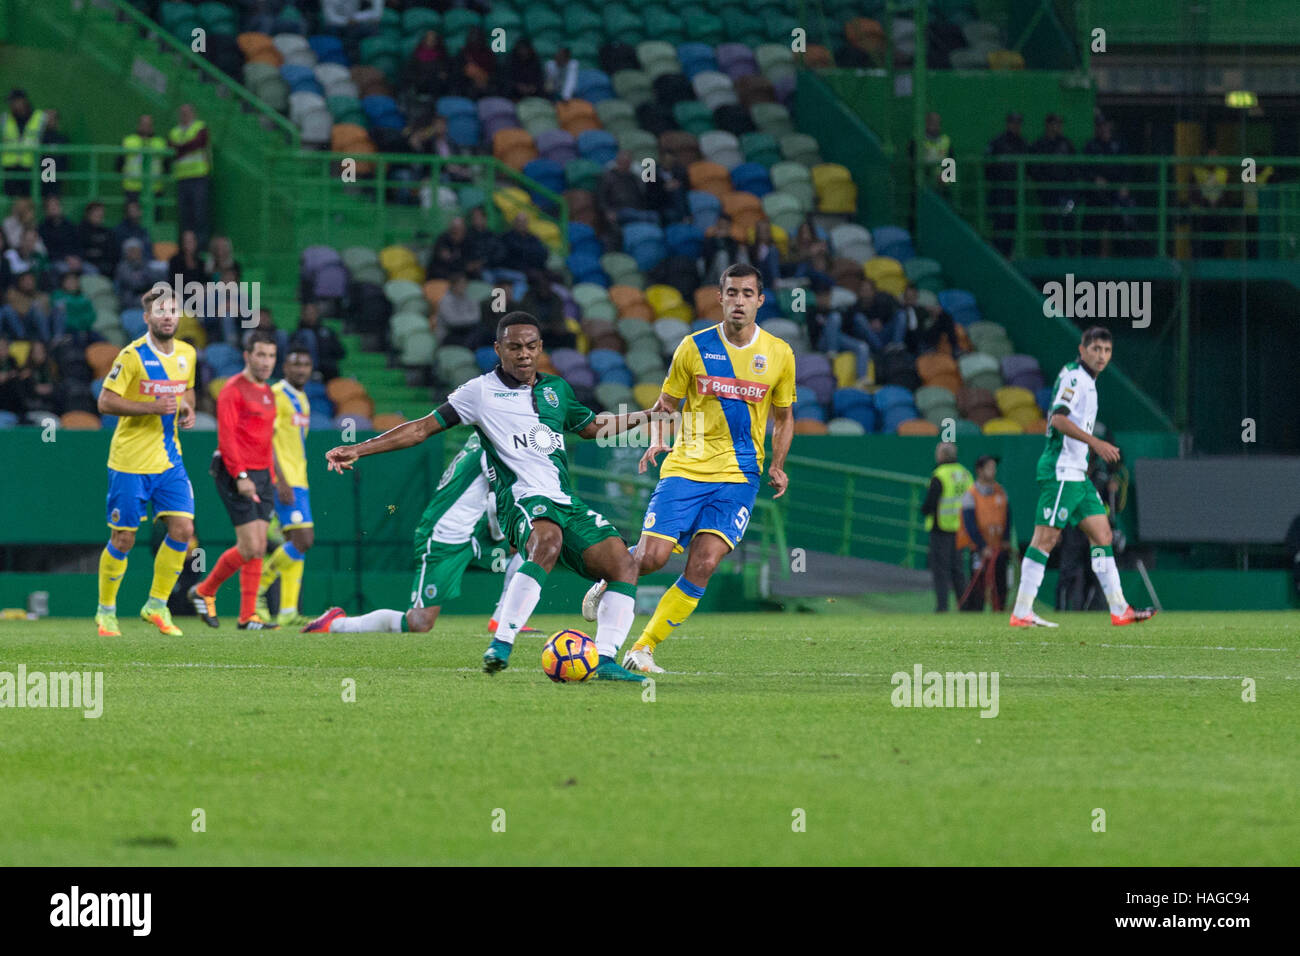 Lisbon, Portugal. 30th Nov, 2016.  Sporting's midfielder from Brazil Elias (22) in action during the game Sporting CP vs FC Arouca Credit:  Alexandre de Sousa/Alamy Live News Stock Photo